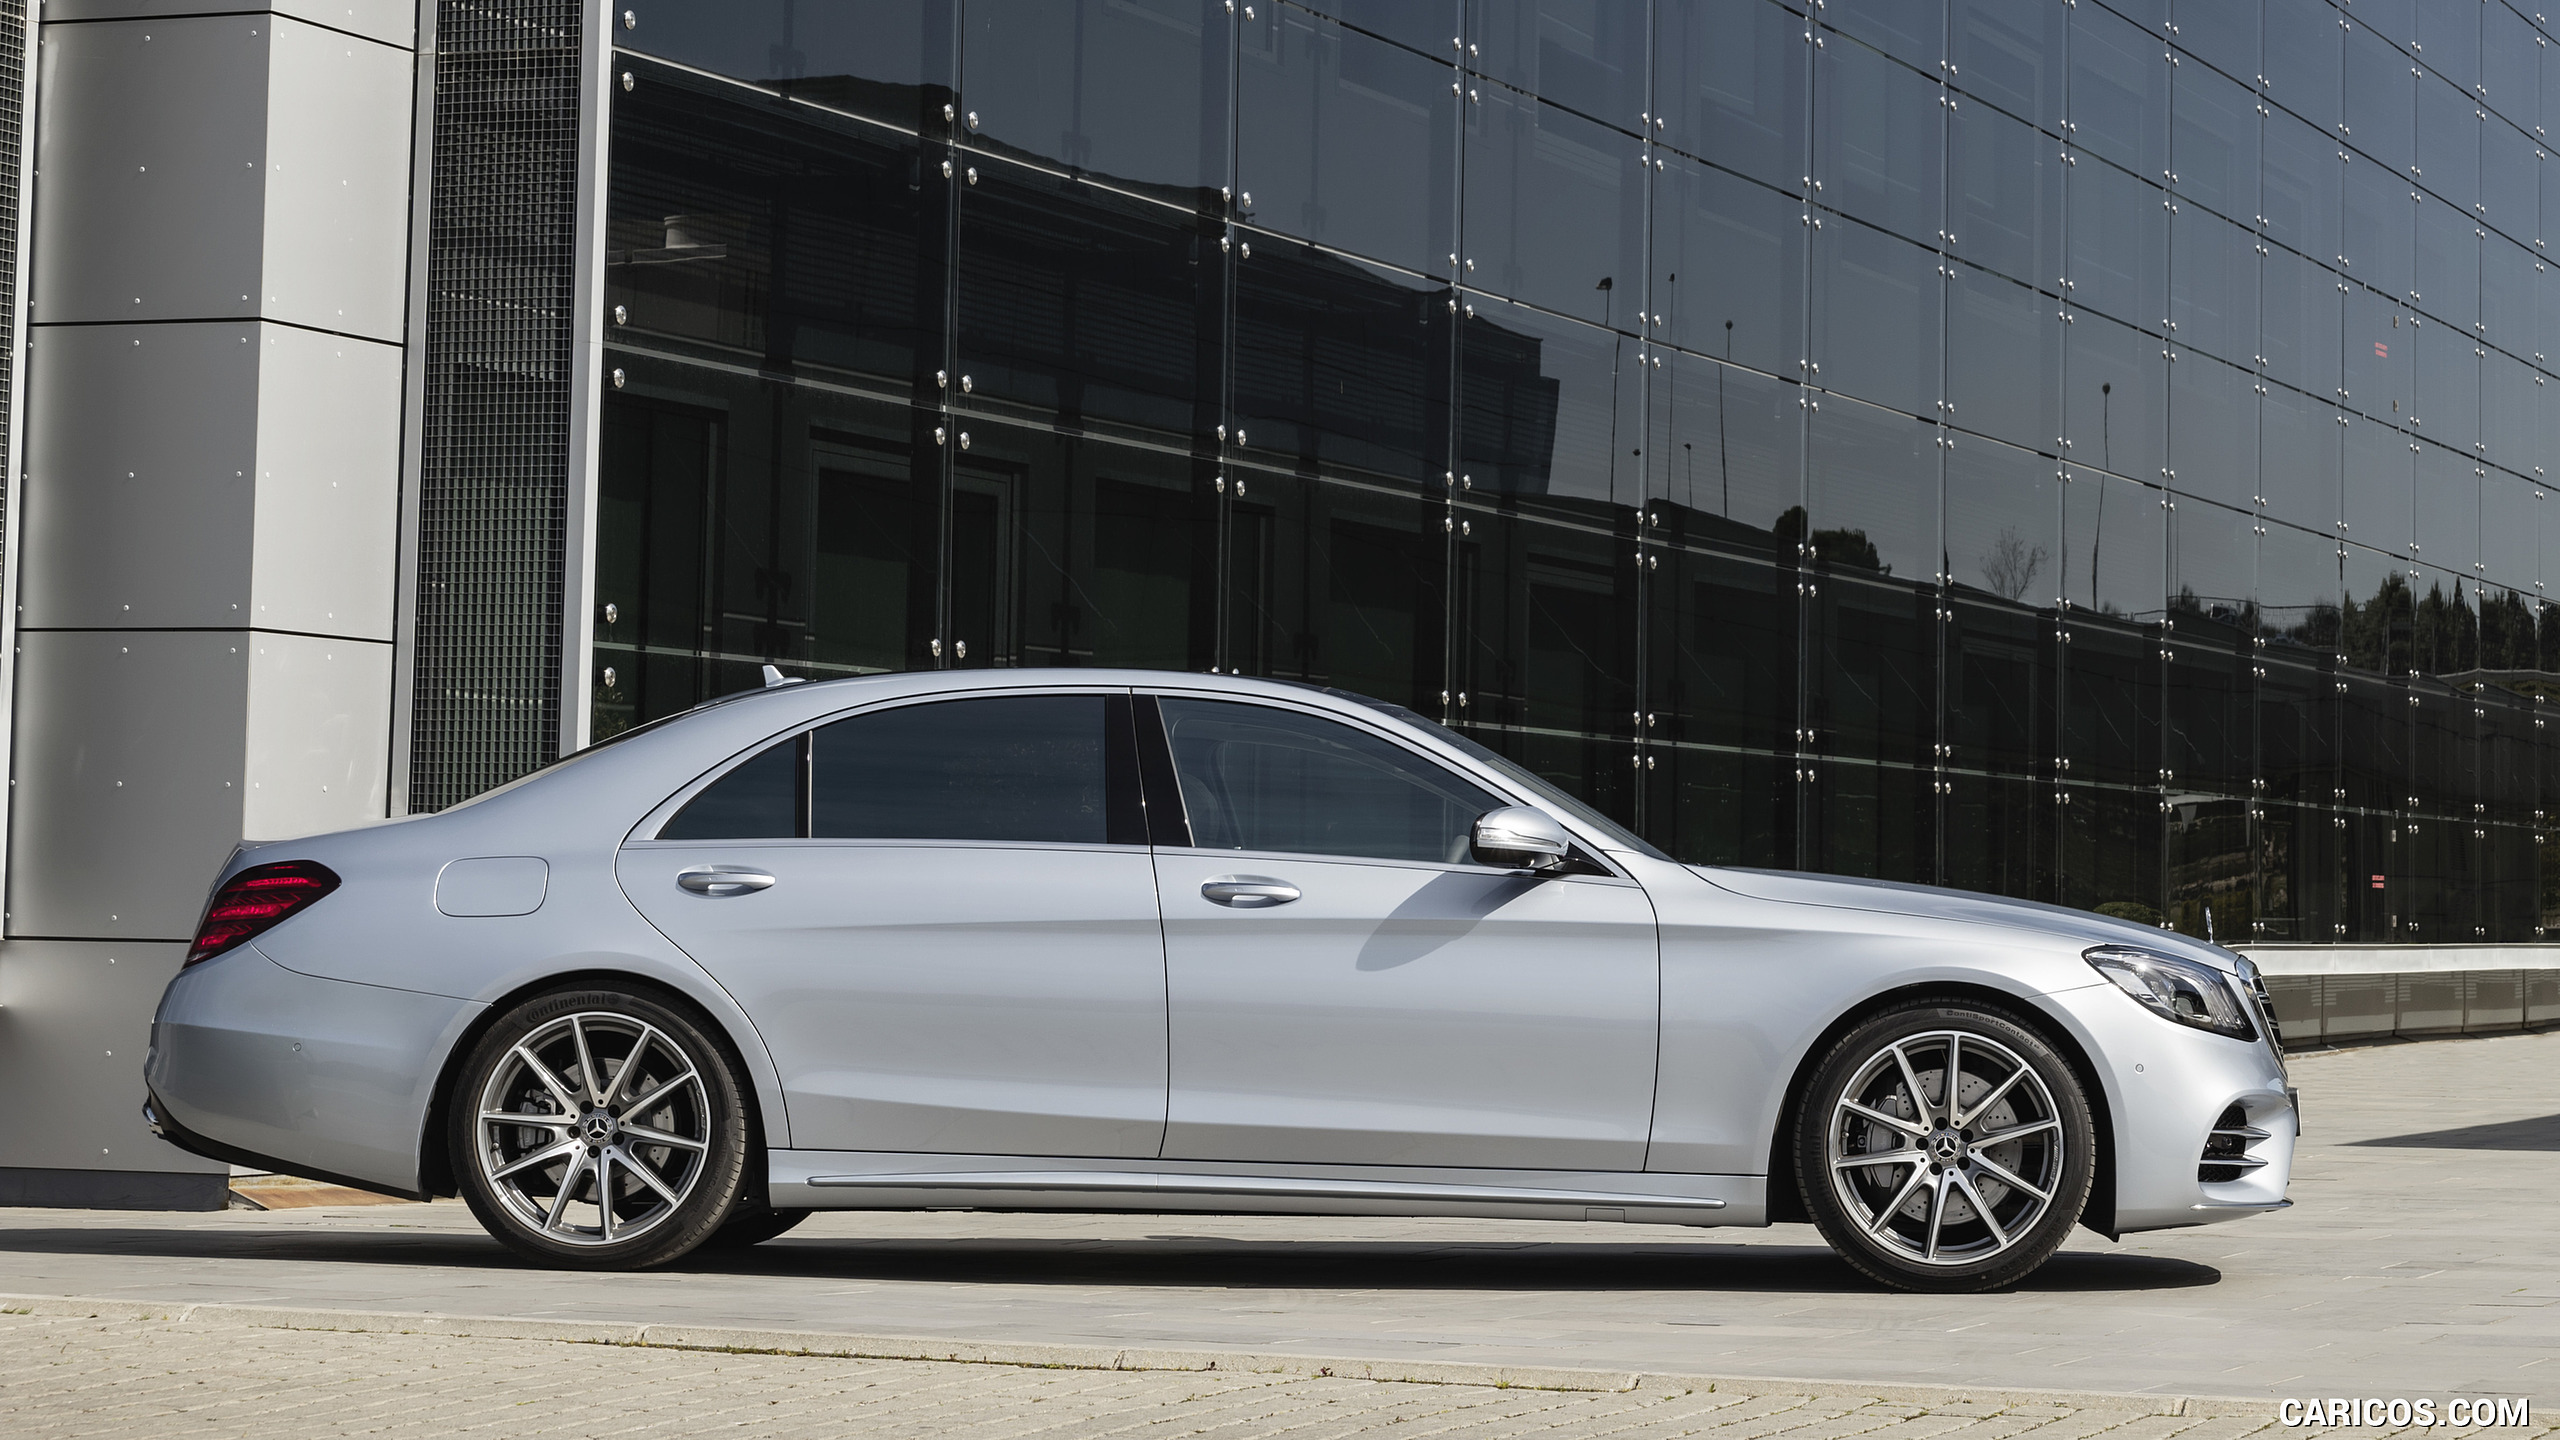 2018 Mercedes-Benz S-Class AMG Line LWB (Color: Diamond Silver), #6 of 156